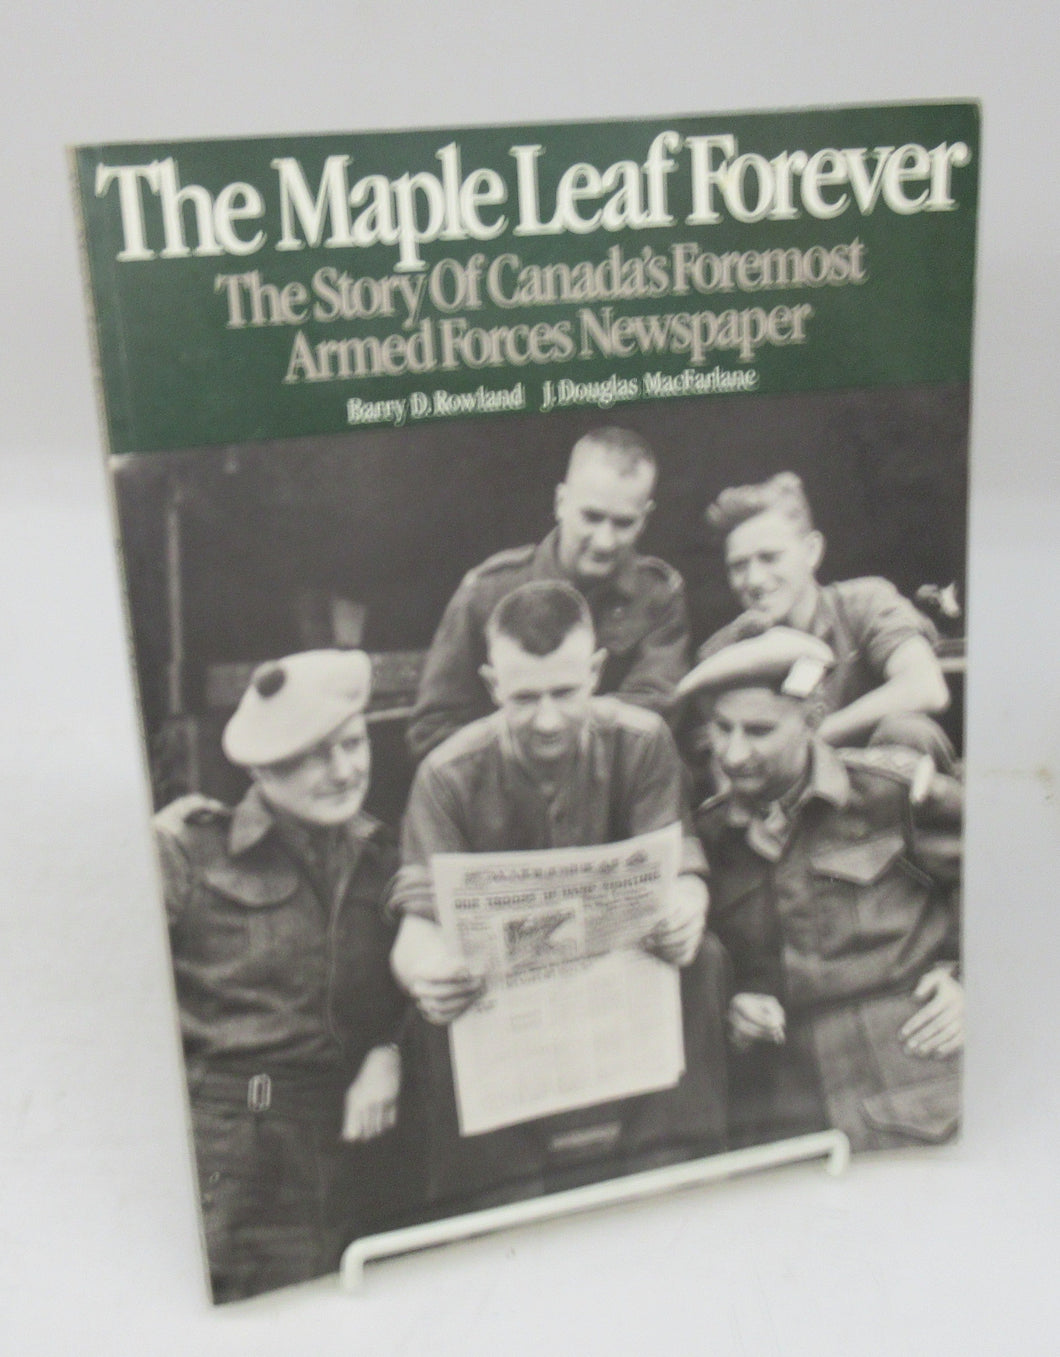 The Maple Leaf Forever: The Story Of Canada's Foremost Armed Forces Newpaper